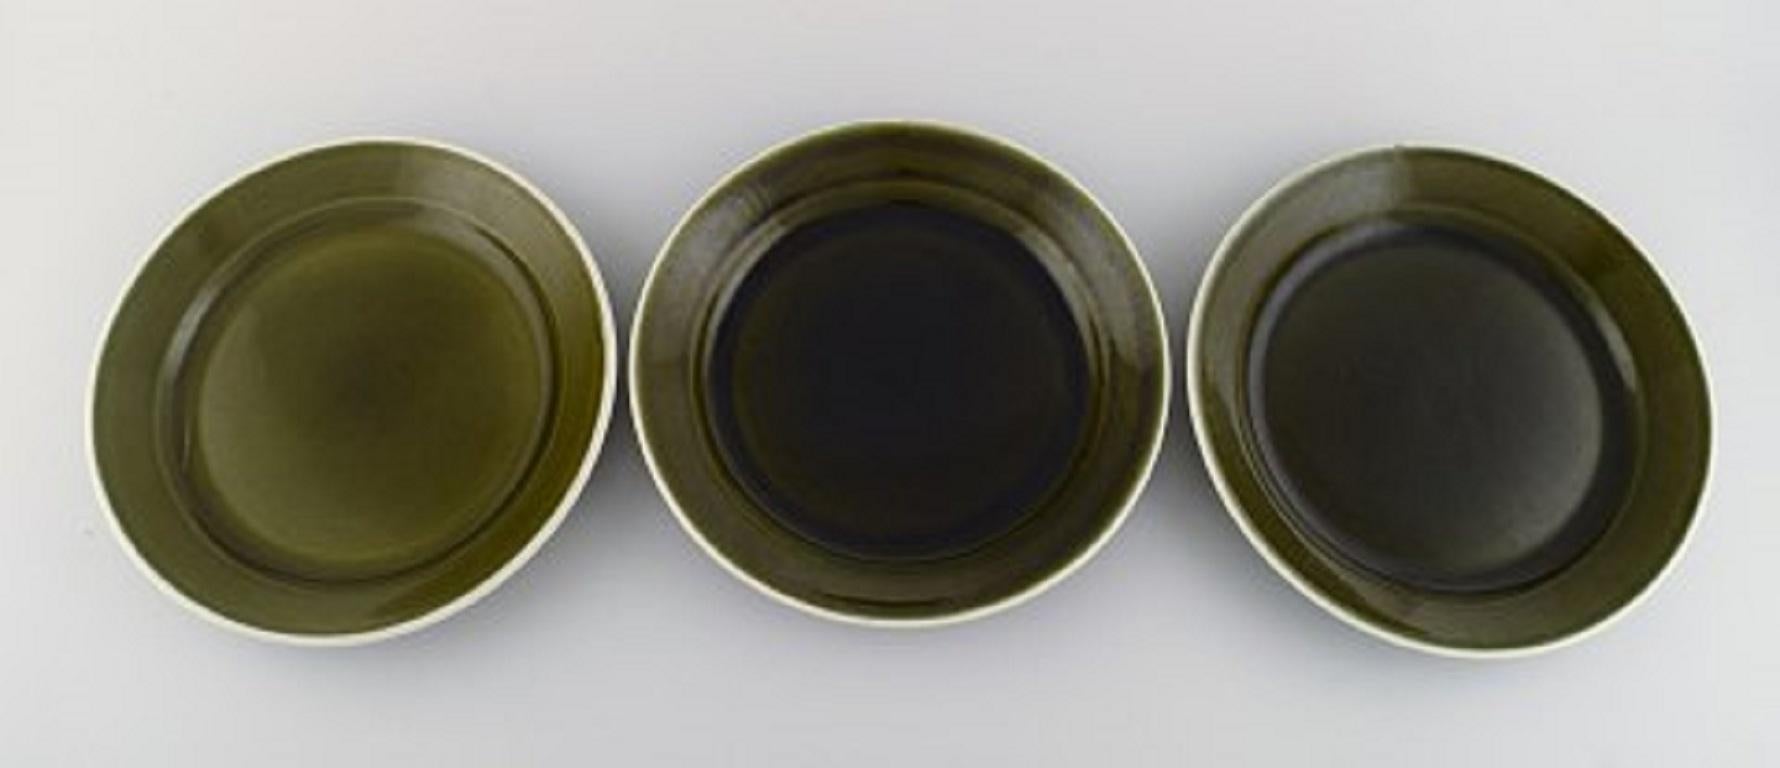 Karin Björquist (1927-2018) for Gustavsberg. Nine Vardag plates in glazed stoneware. 
Beautiful glaze in olive green tones,
Mid-20th century.
Measure: Diameter: 25 cm.
In excellent condition.
Stamped.